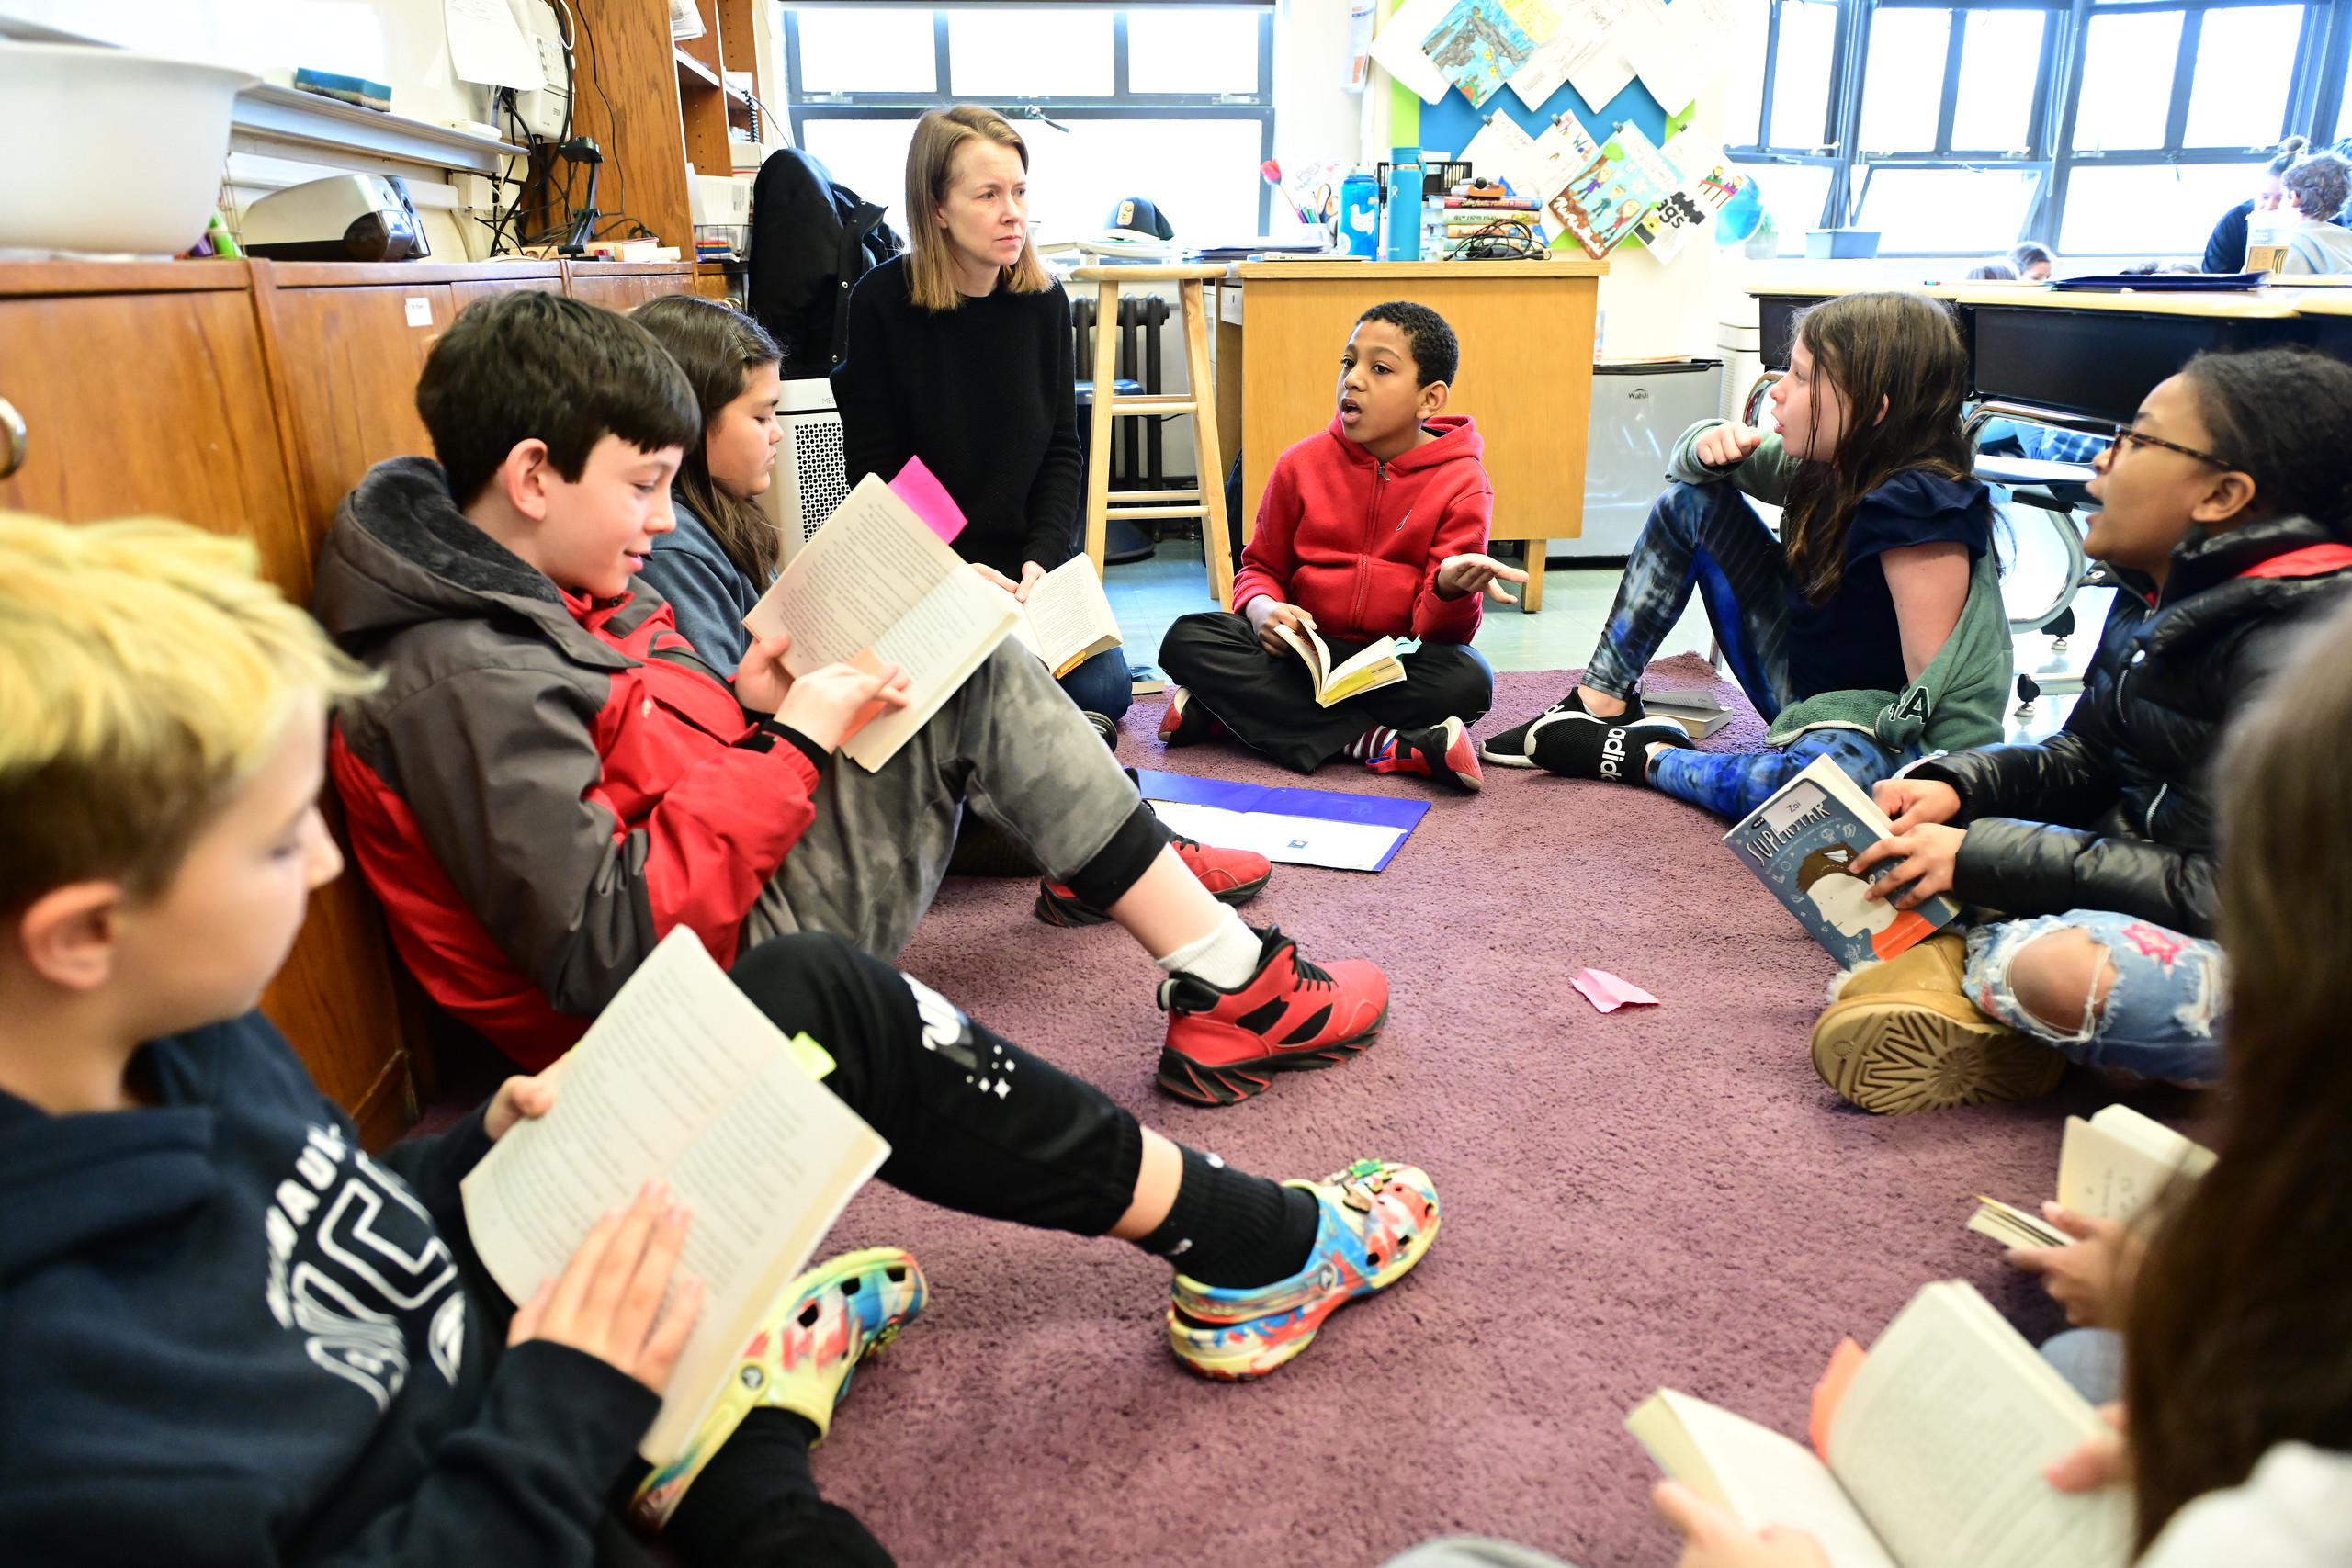 Fieldston Lower students sit in a circle on the floor and engage in discussion.